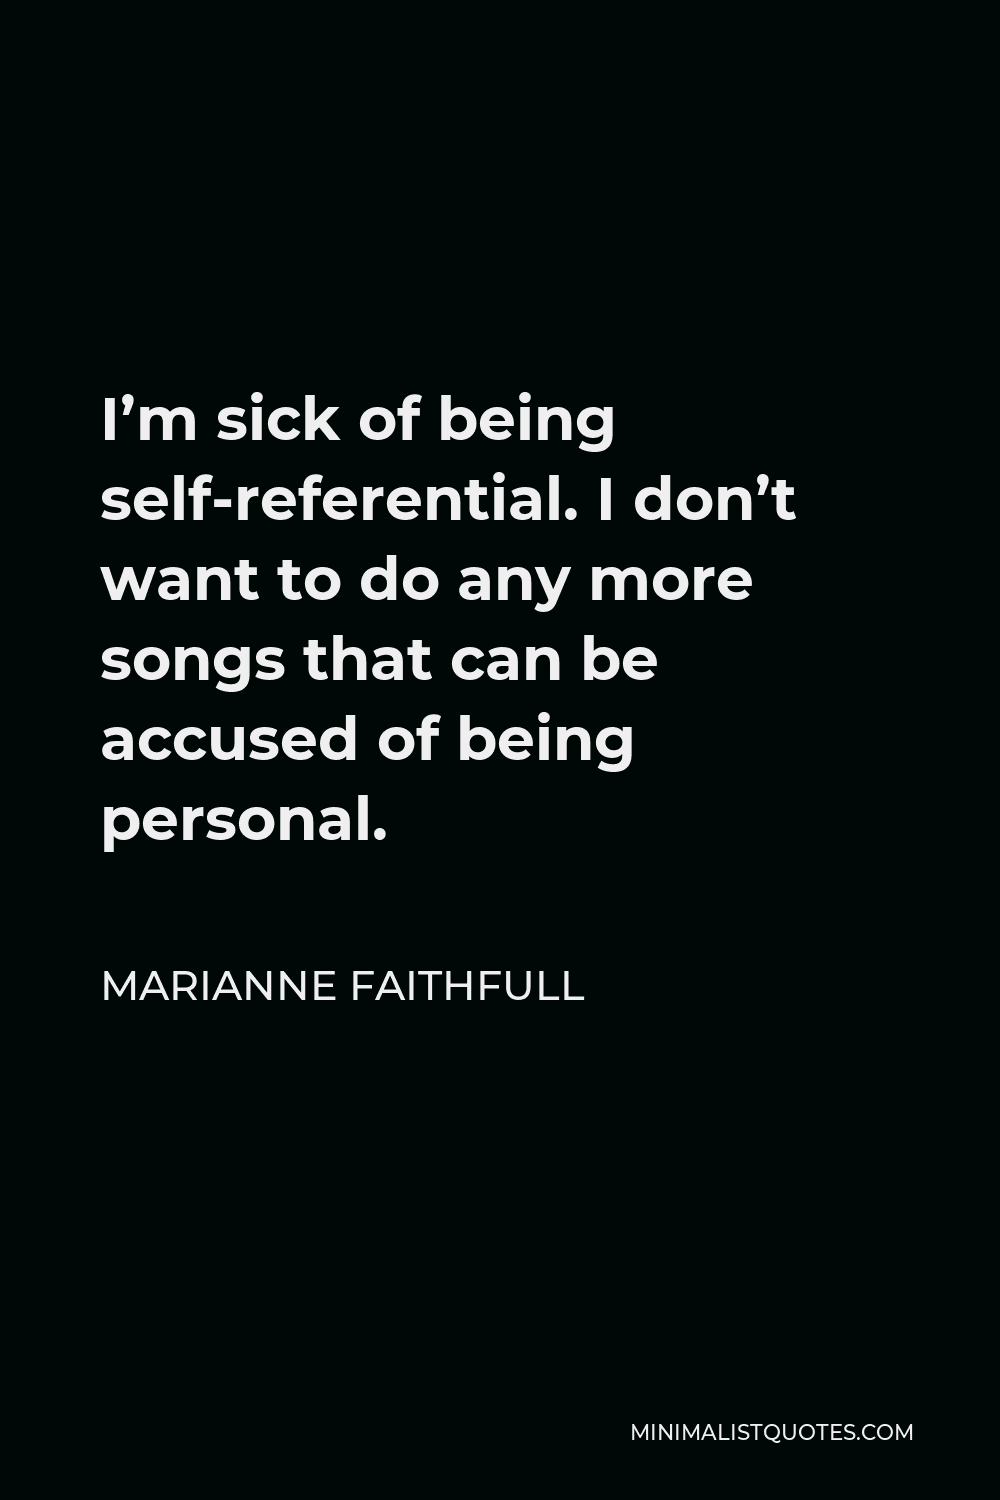 Marianne Faithfull Quote - I’m sick of being self-referential. I don’t want to do any more songs that can be accused of being personal.